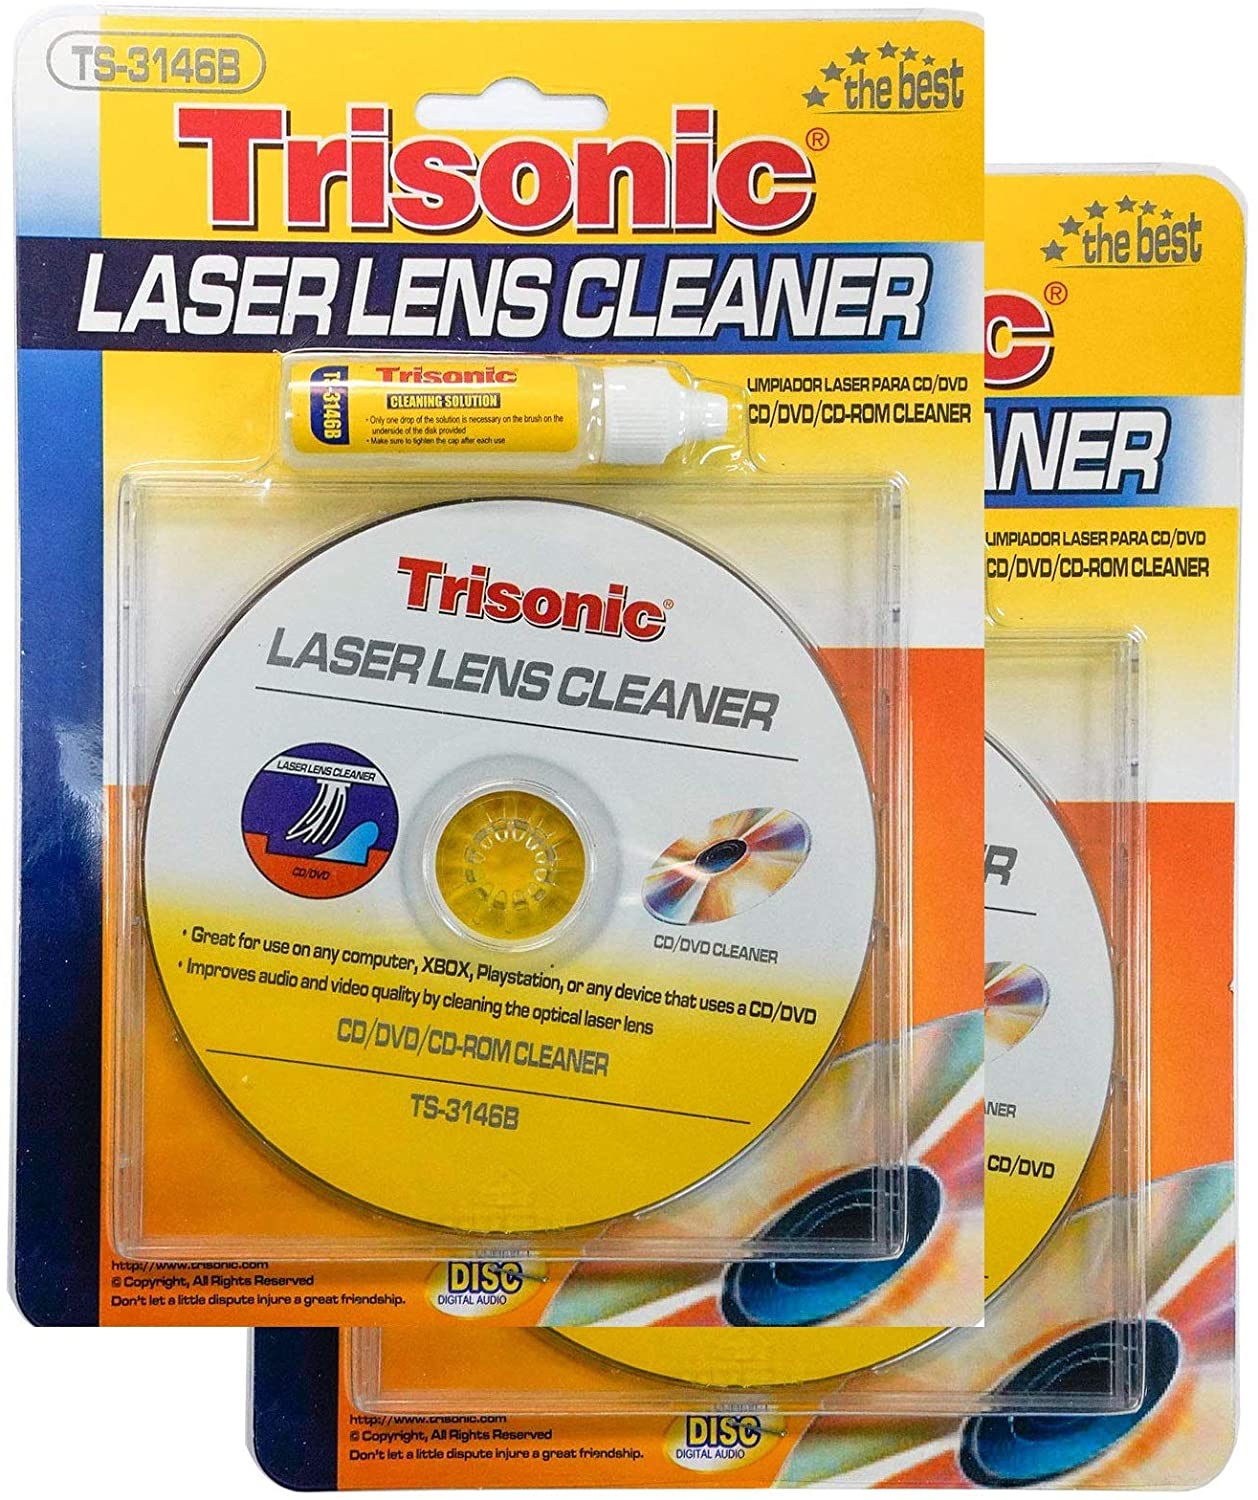 Laser Lens Cleaner for Cd Dvd Cd-rom Pc Ps2 Ps3 X-box Includes Cleaning Liquid - Pack of 2